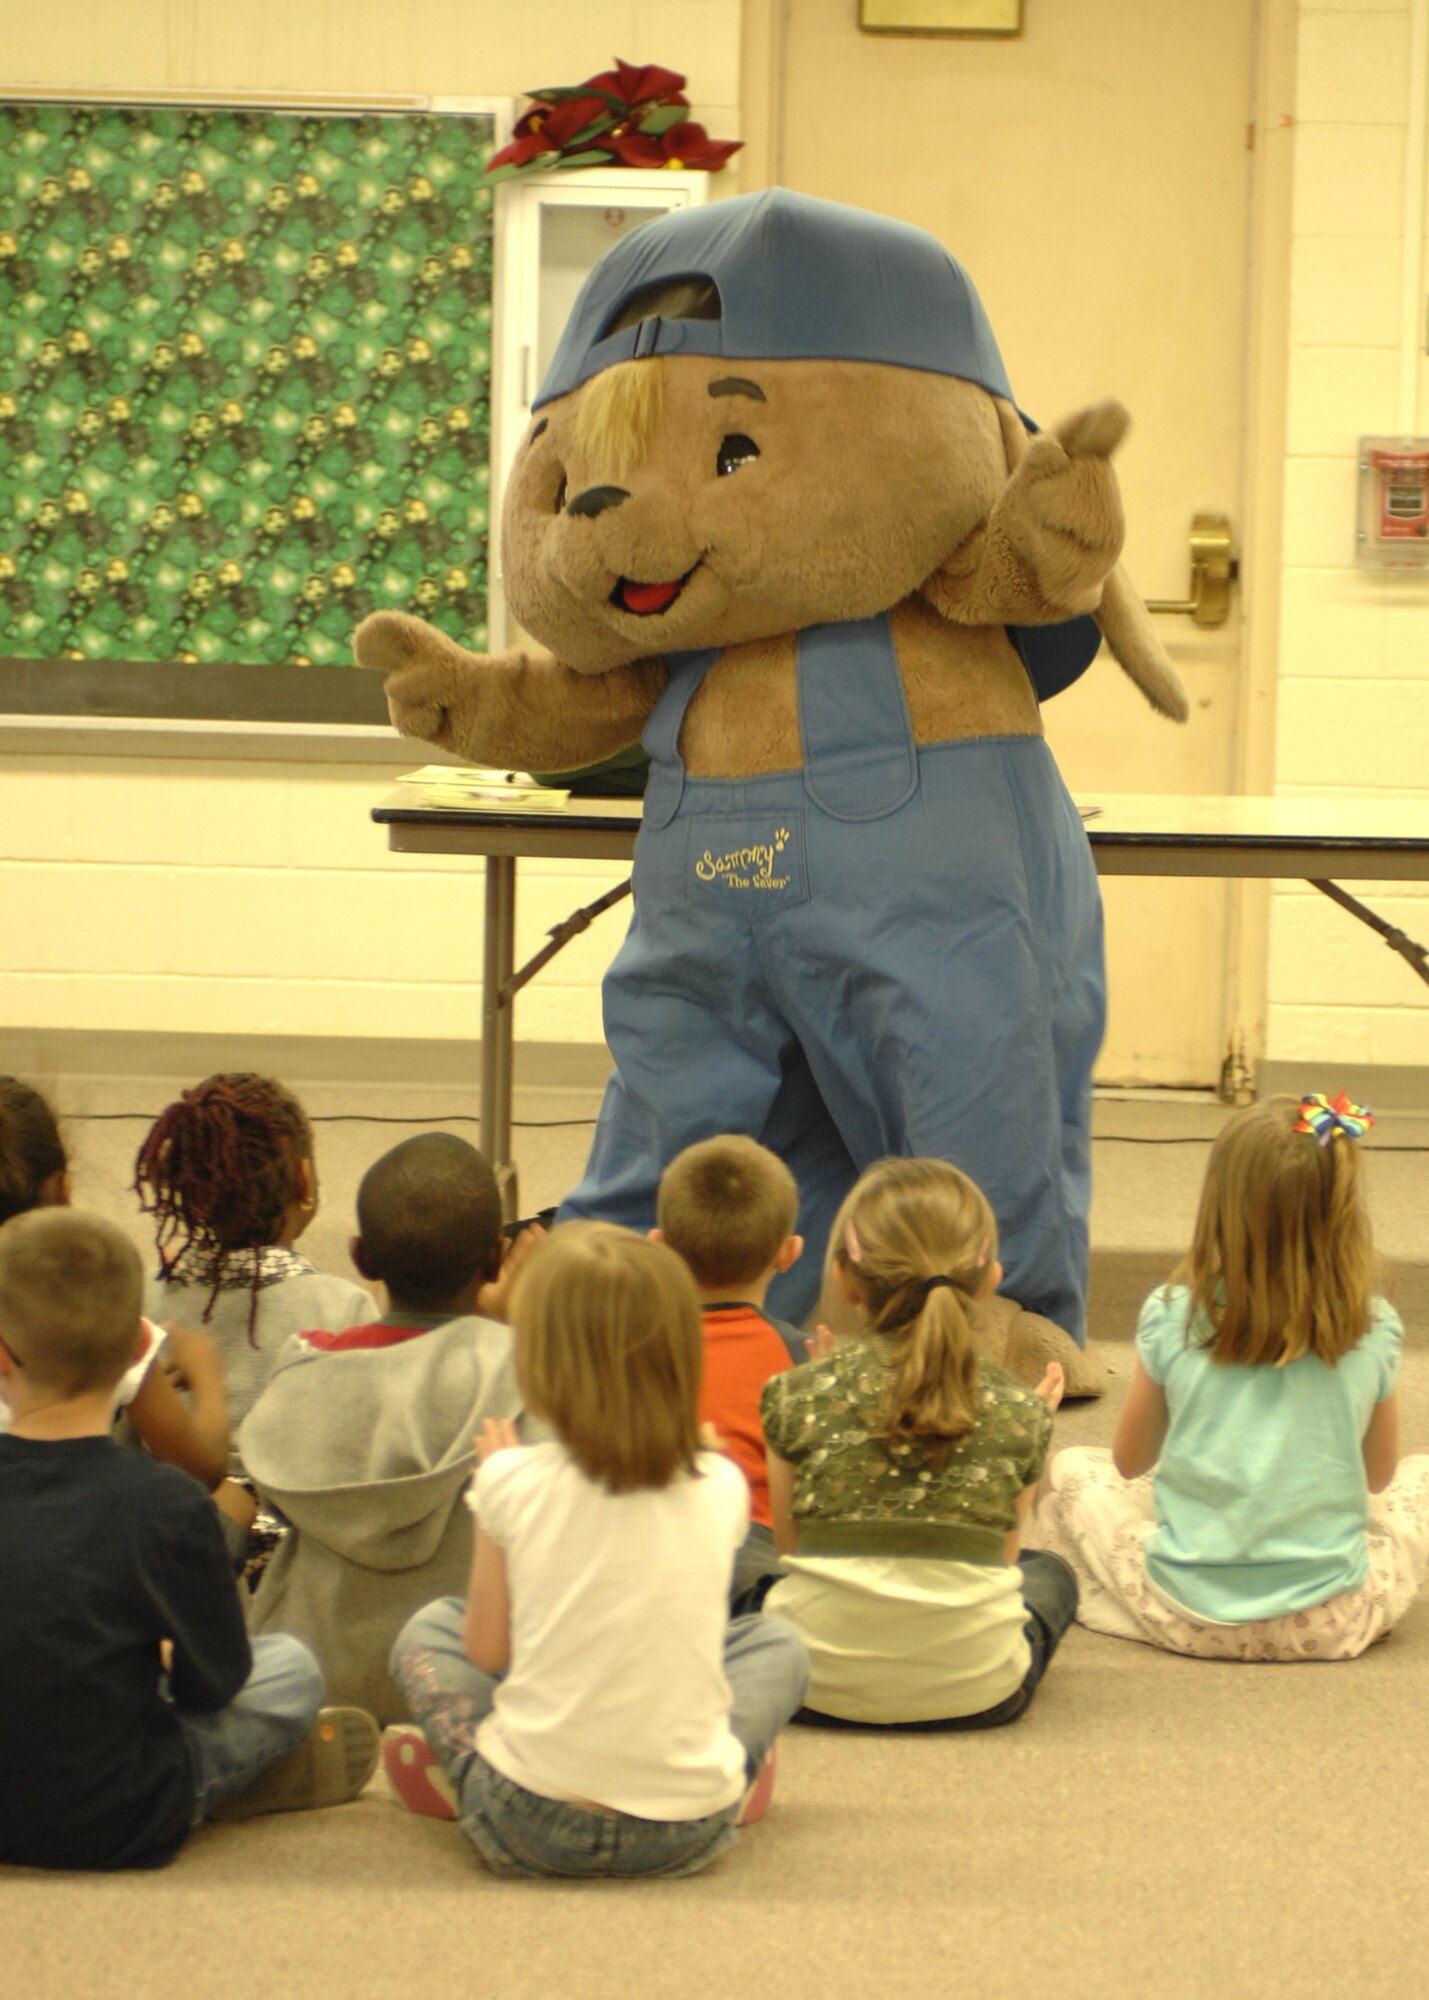 "Sammy the Rabbit", co-created by Mr. Sam Renick, children's author, educates children at the Primary School, Feb. 26, at Holloman Air Force Base, N.M., on saving money early. Mr. Renick visits numerous military installations to speak to children about getting in the habit of saving money early. (U.S. Air Force photo/Airman 1st Class Rachel A. Kocin)